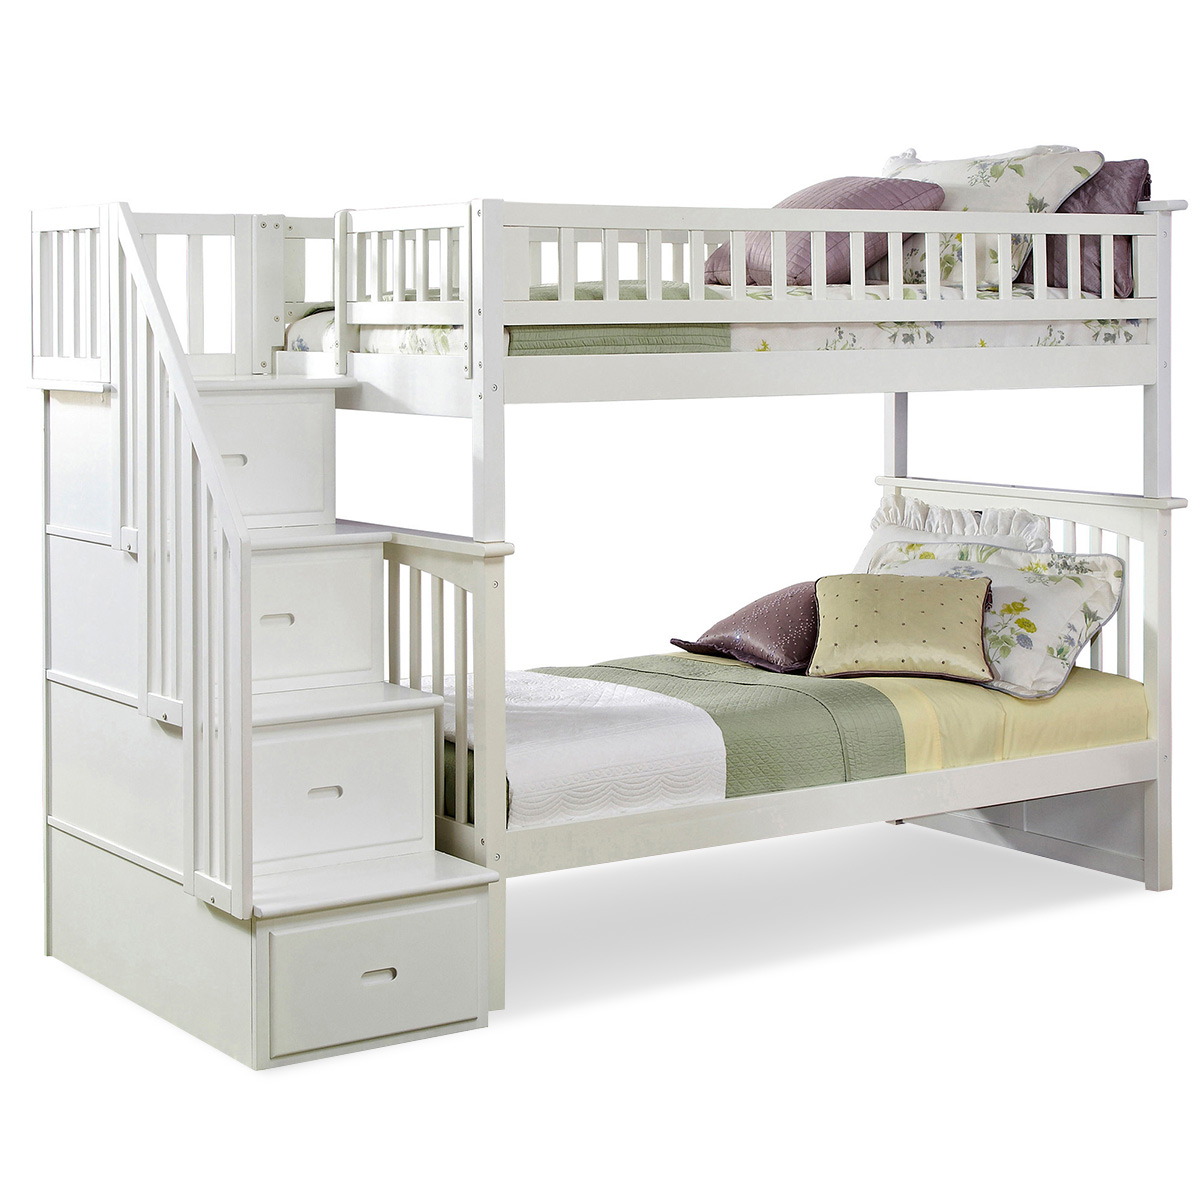 Giường tầng BOB upload/attachment/thumb/9680atlantic-furniture-columbia-staircase-twin-over-twin-storage-bunk-bed-in-white-37.jpg